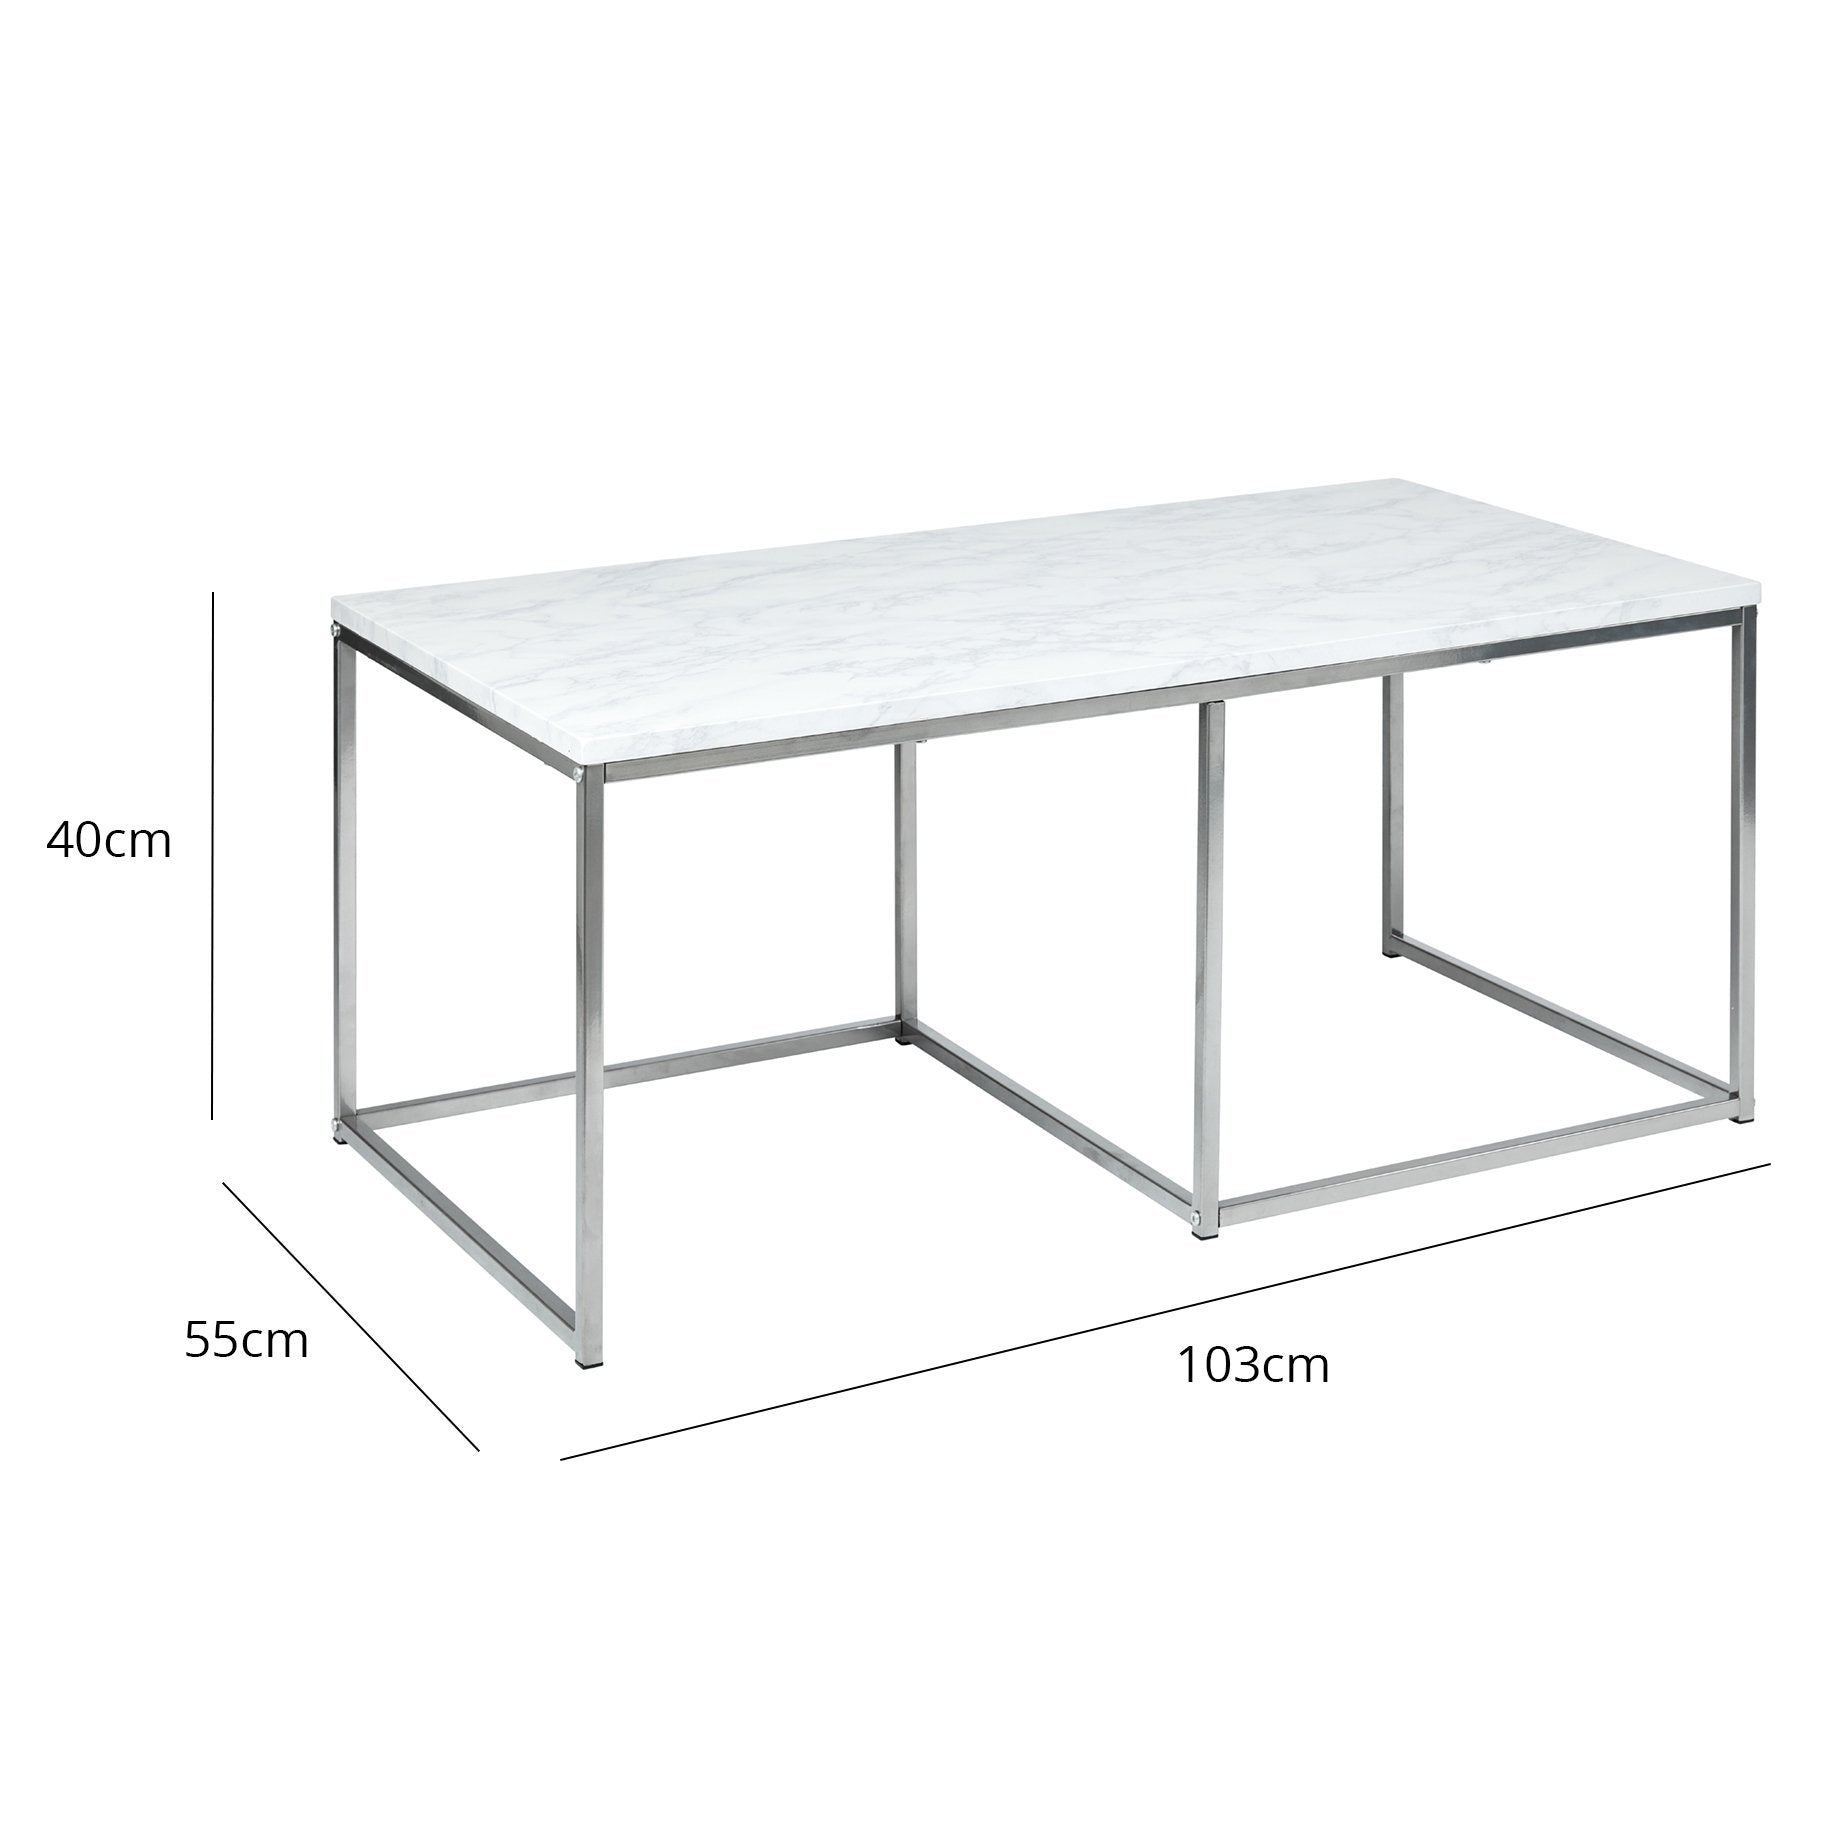 Jay coffee table and side tables - marble effect and chrome - Laura James